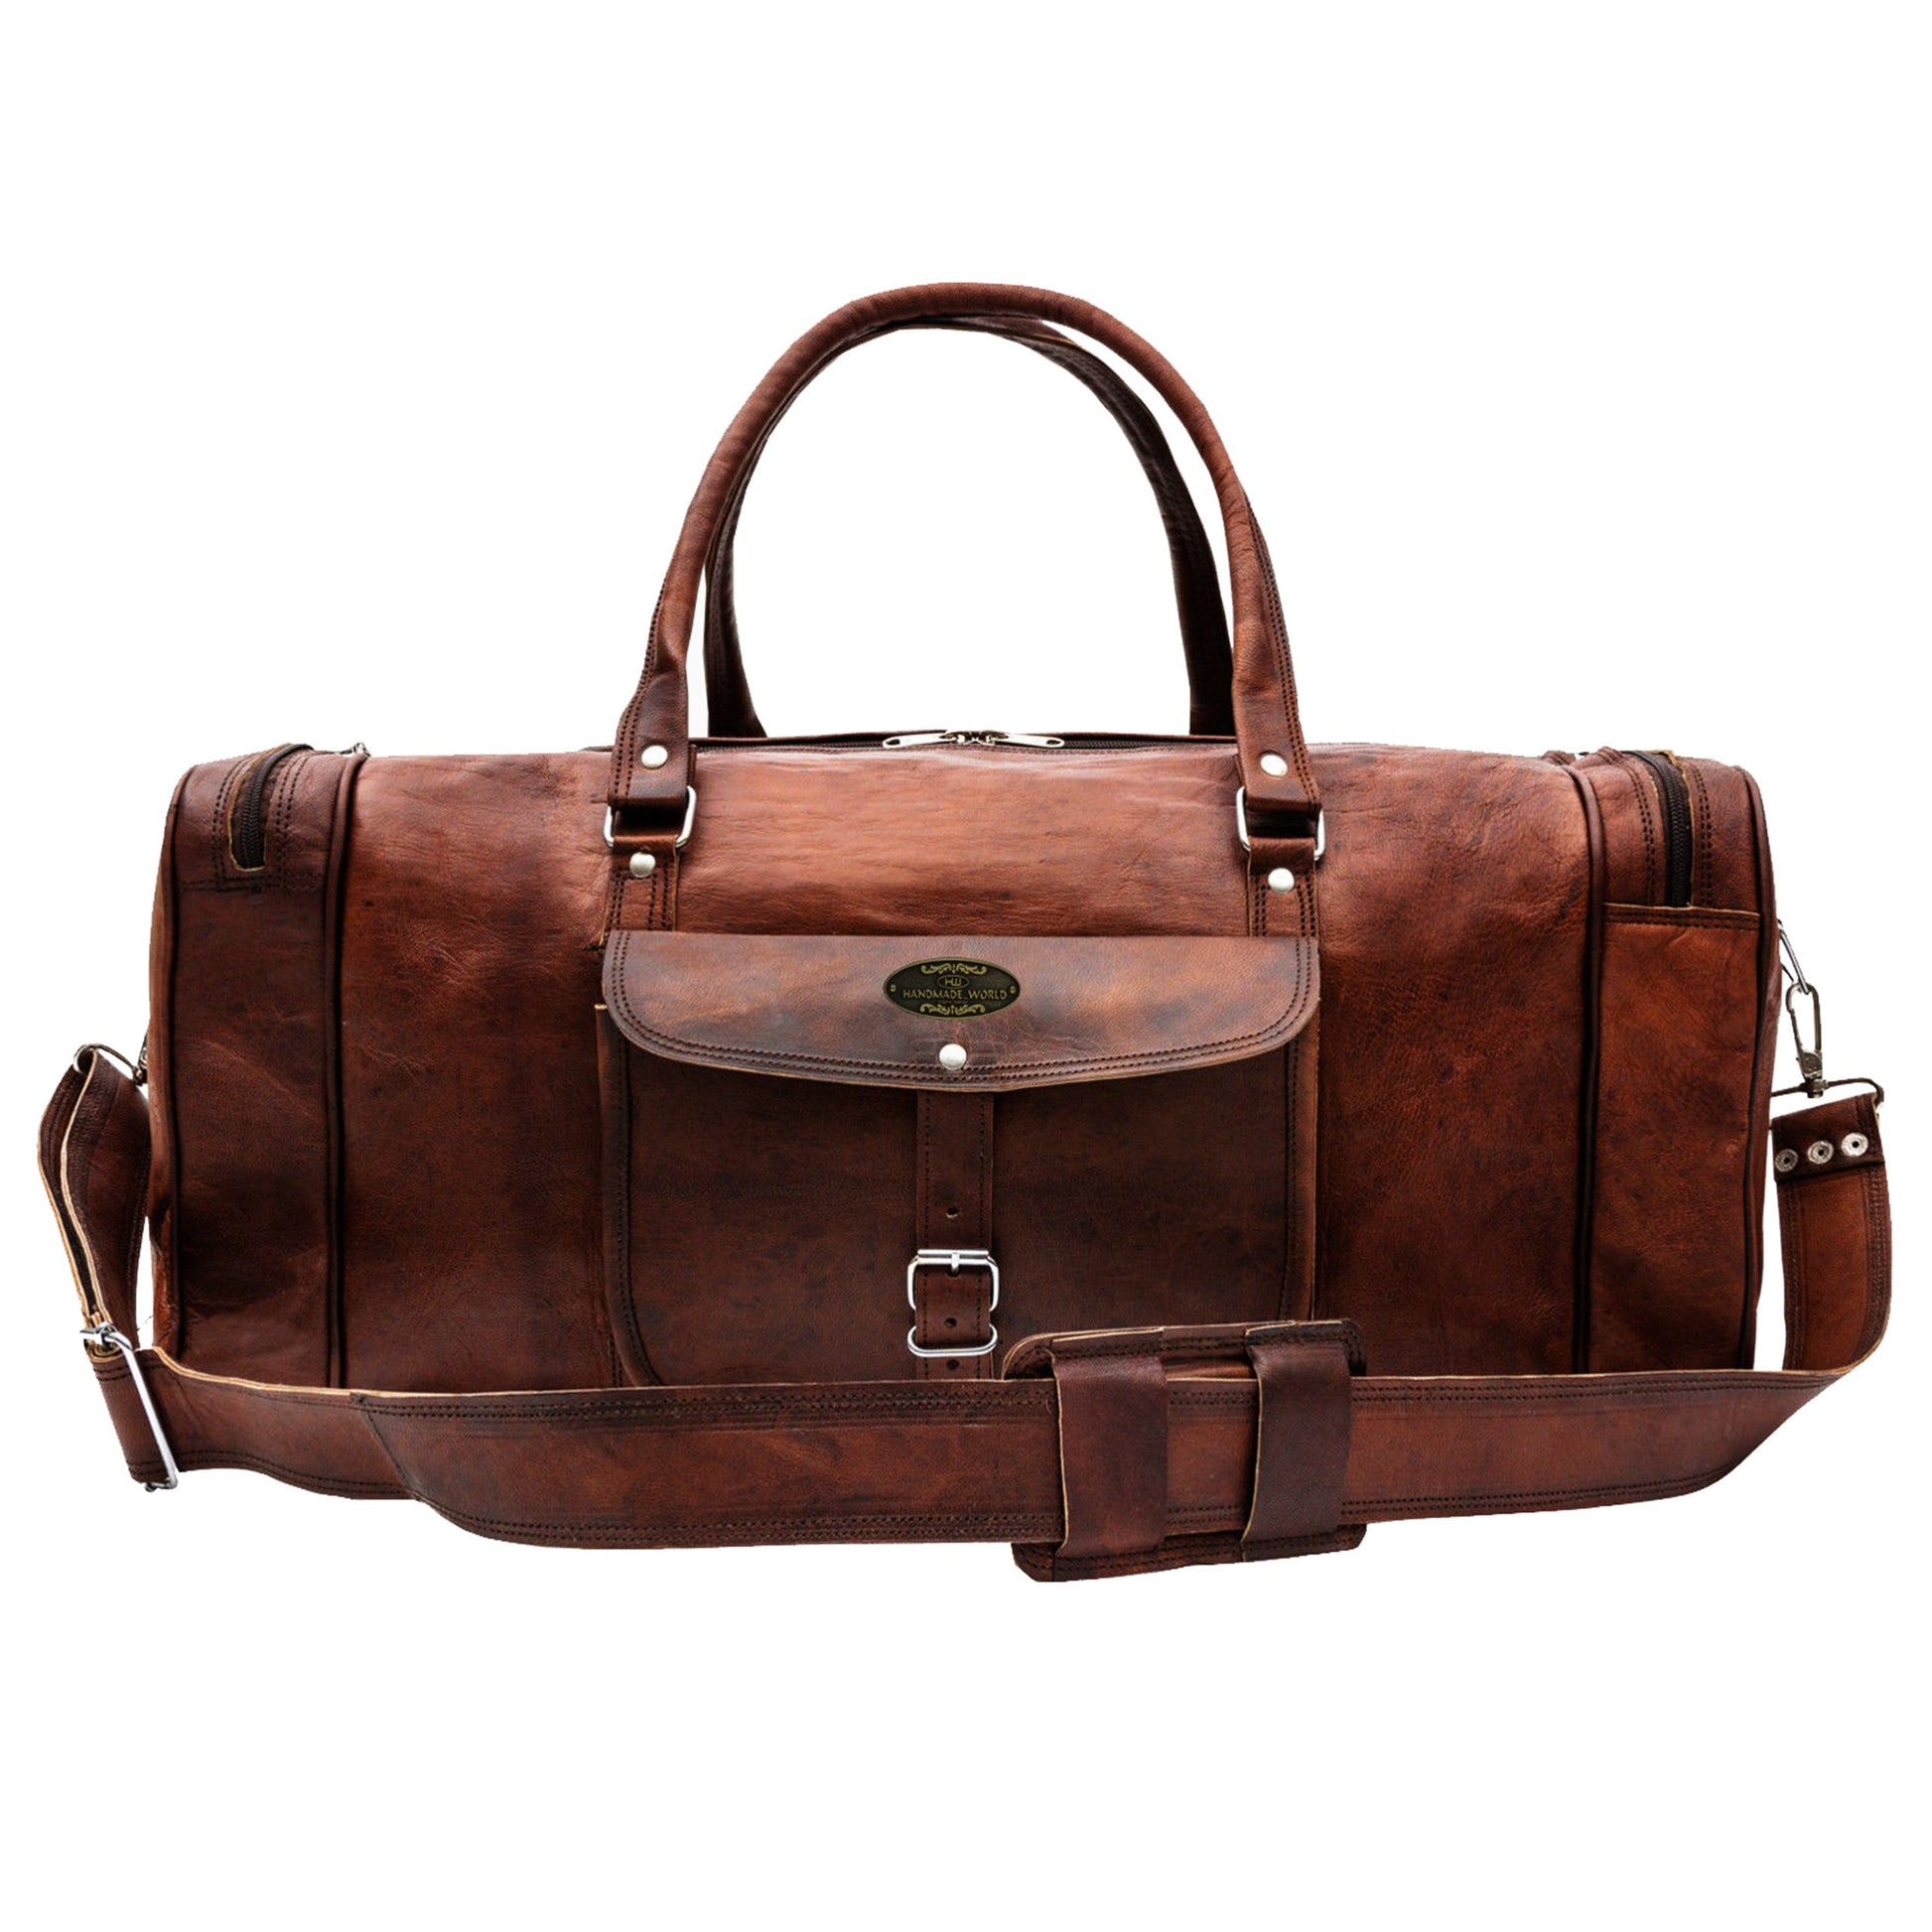 Full Grain Brown Large Leather Duffel Bag with Top handle